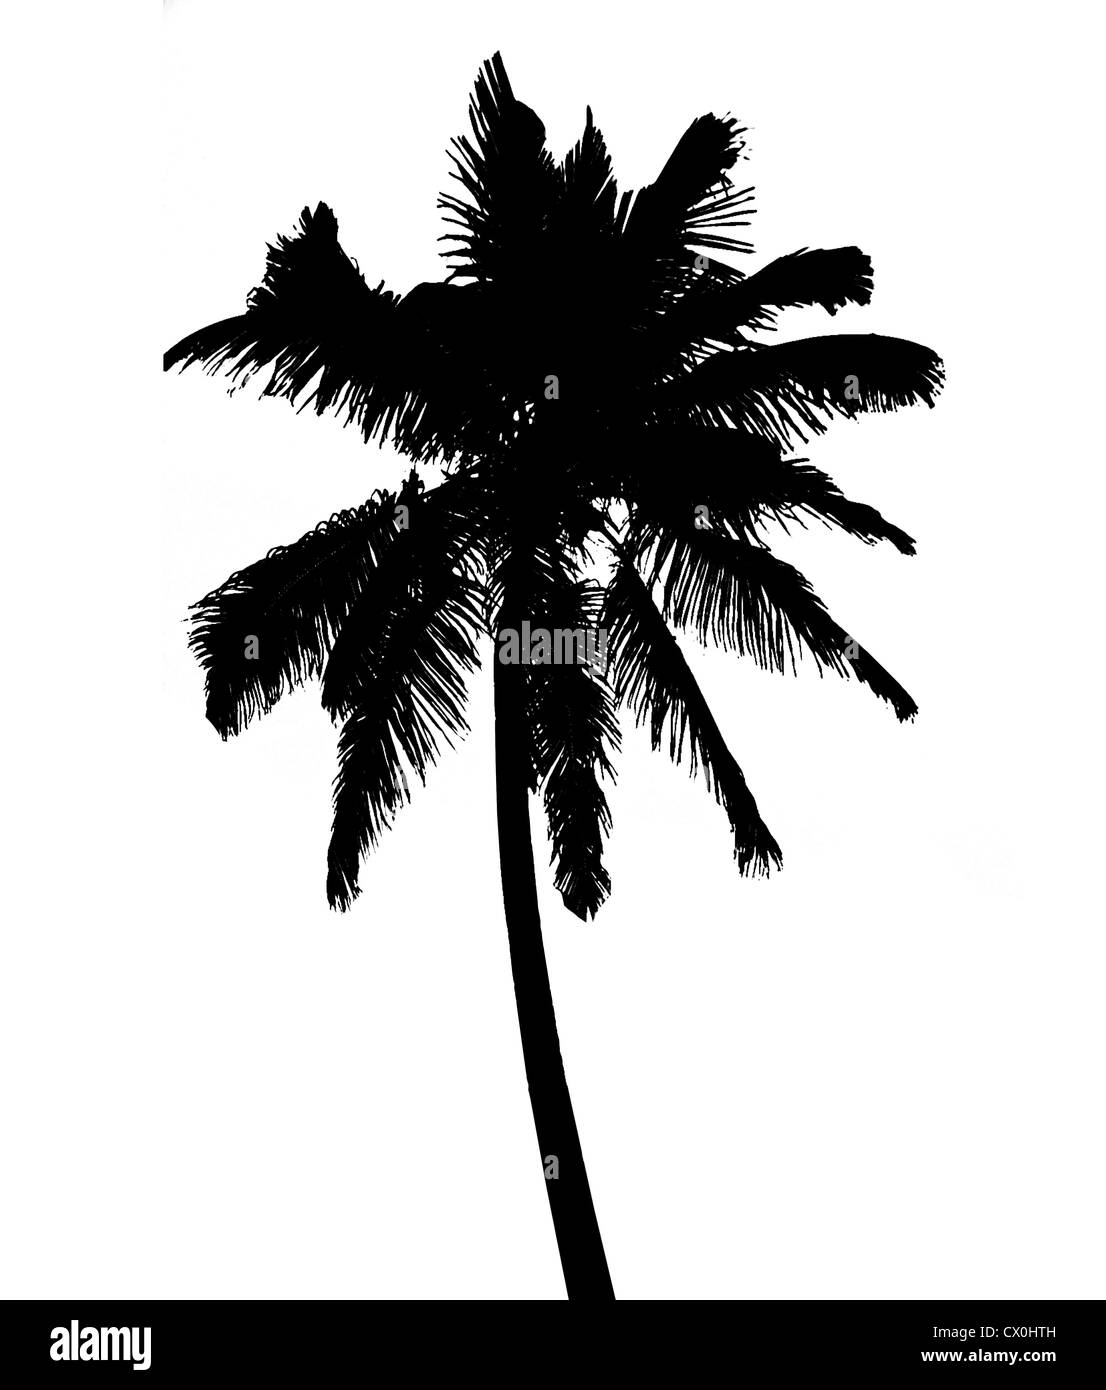 Silhouette of coconut palm isolated on white, illustration Stock Photo